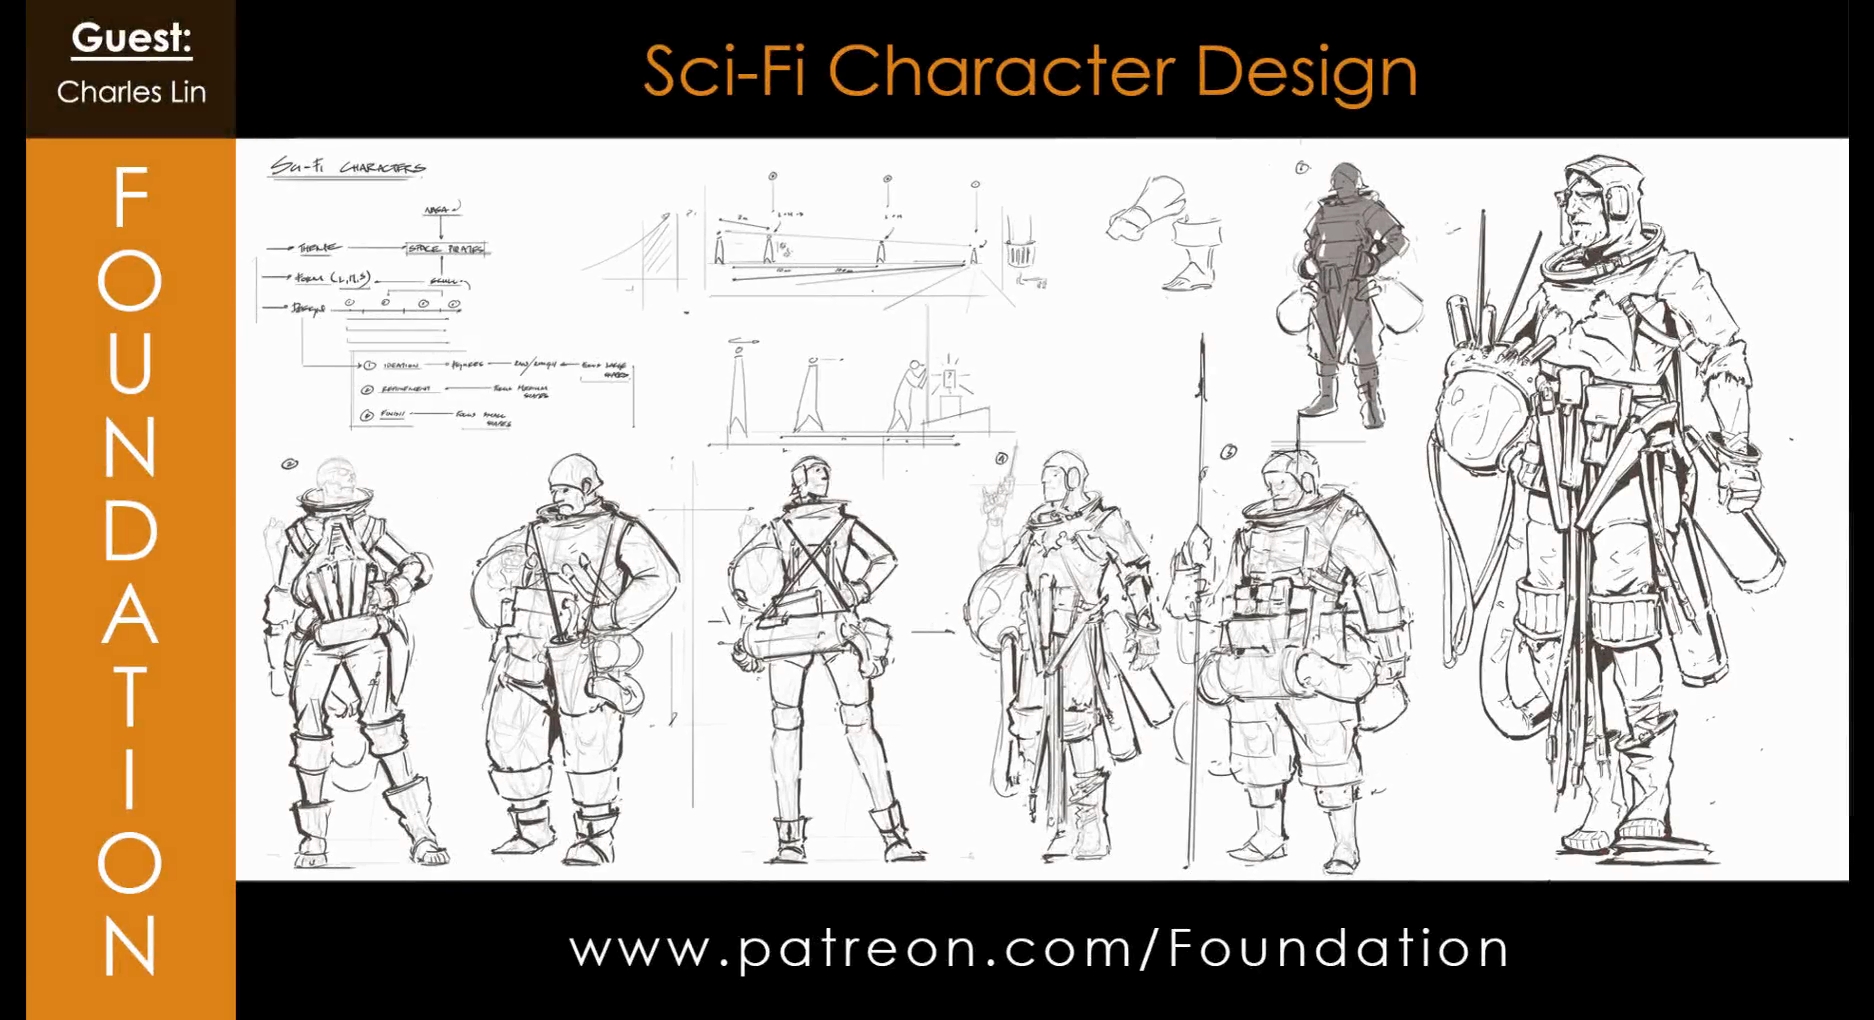 Sci-Fi Character Design with Charles Lin